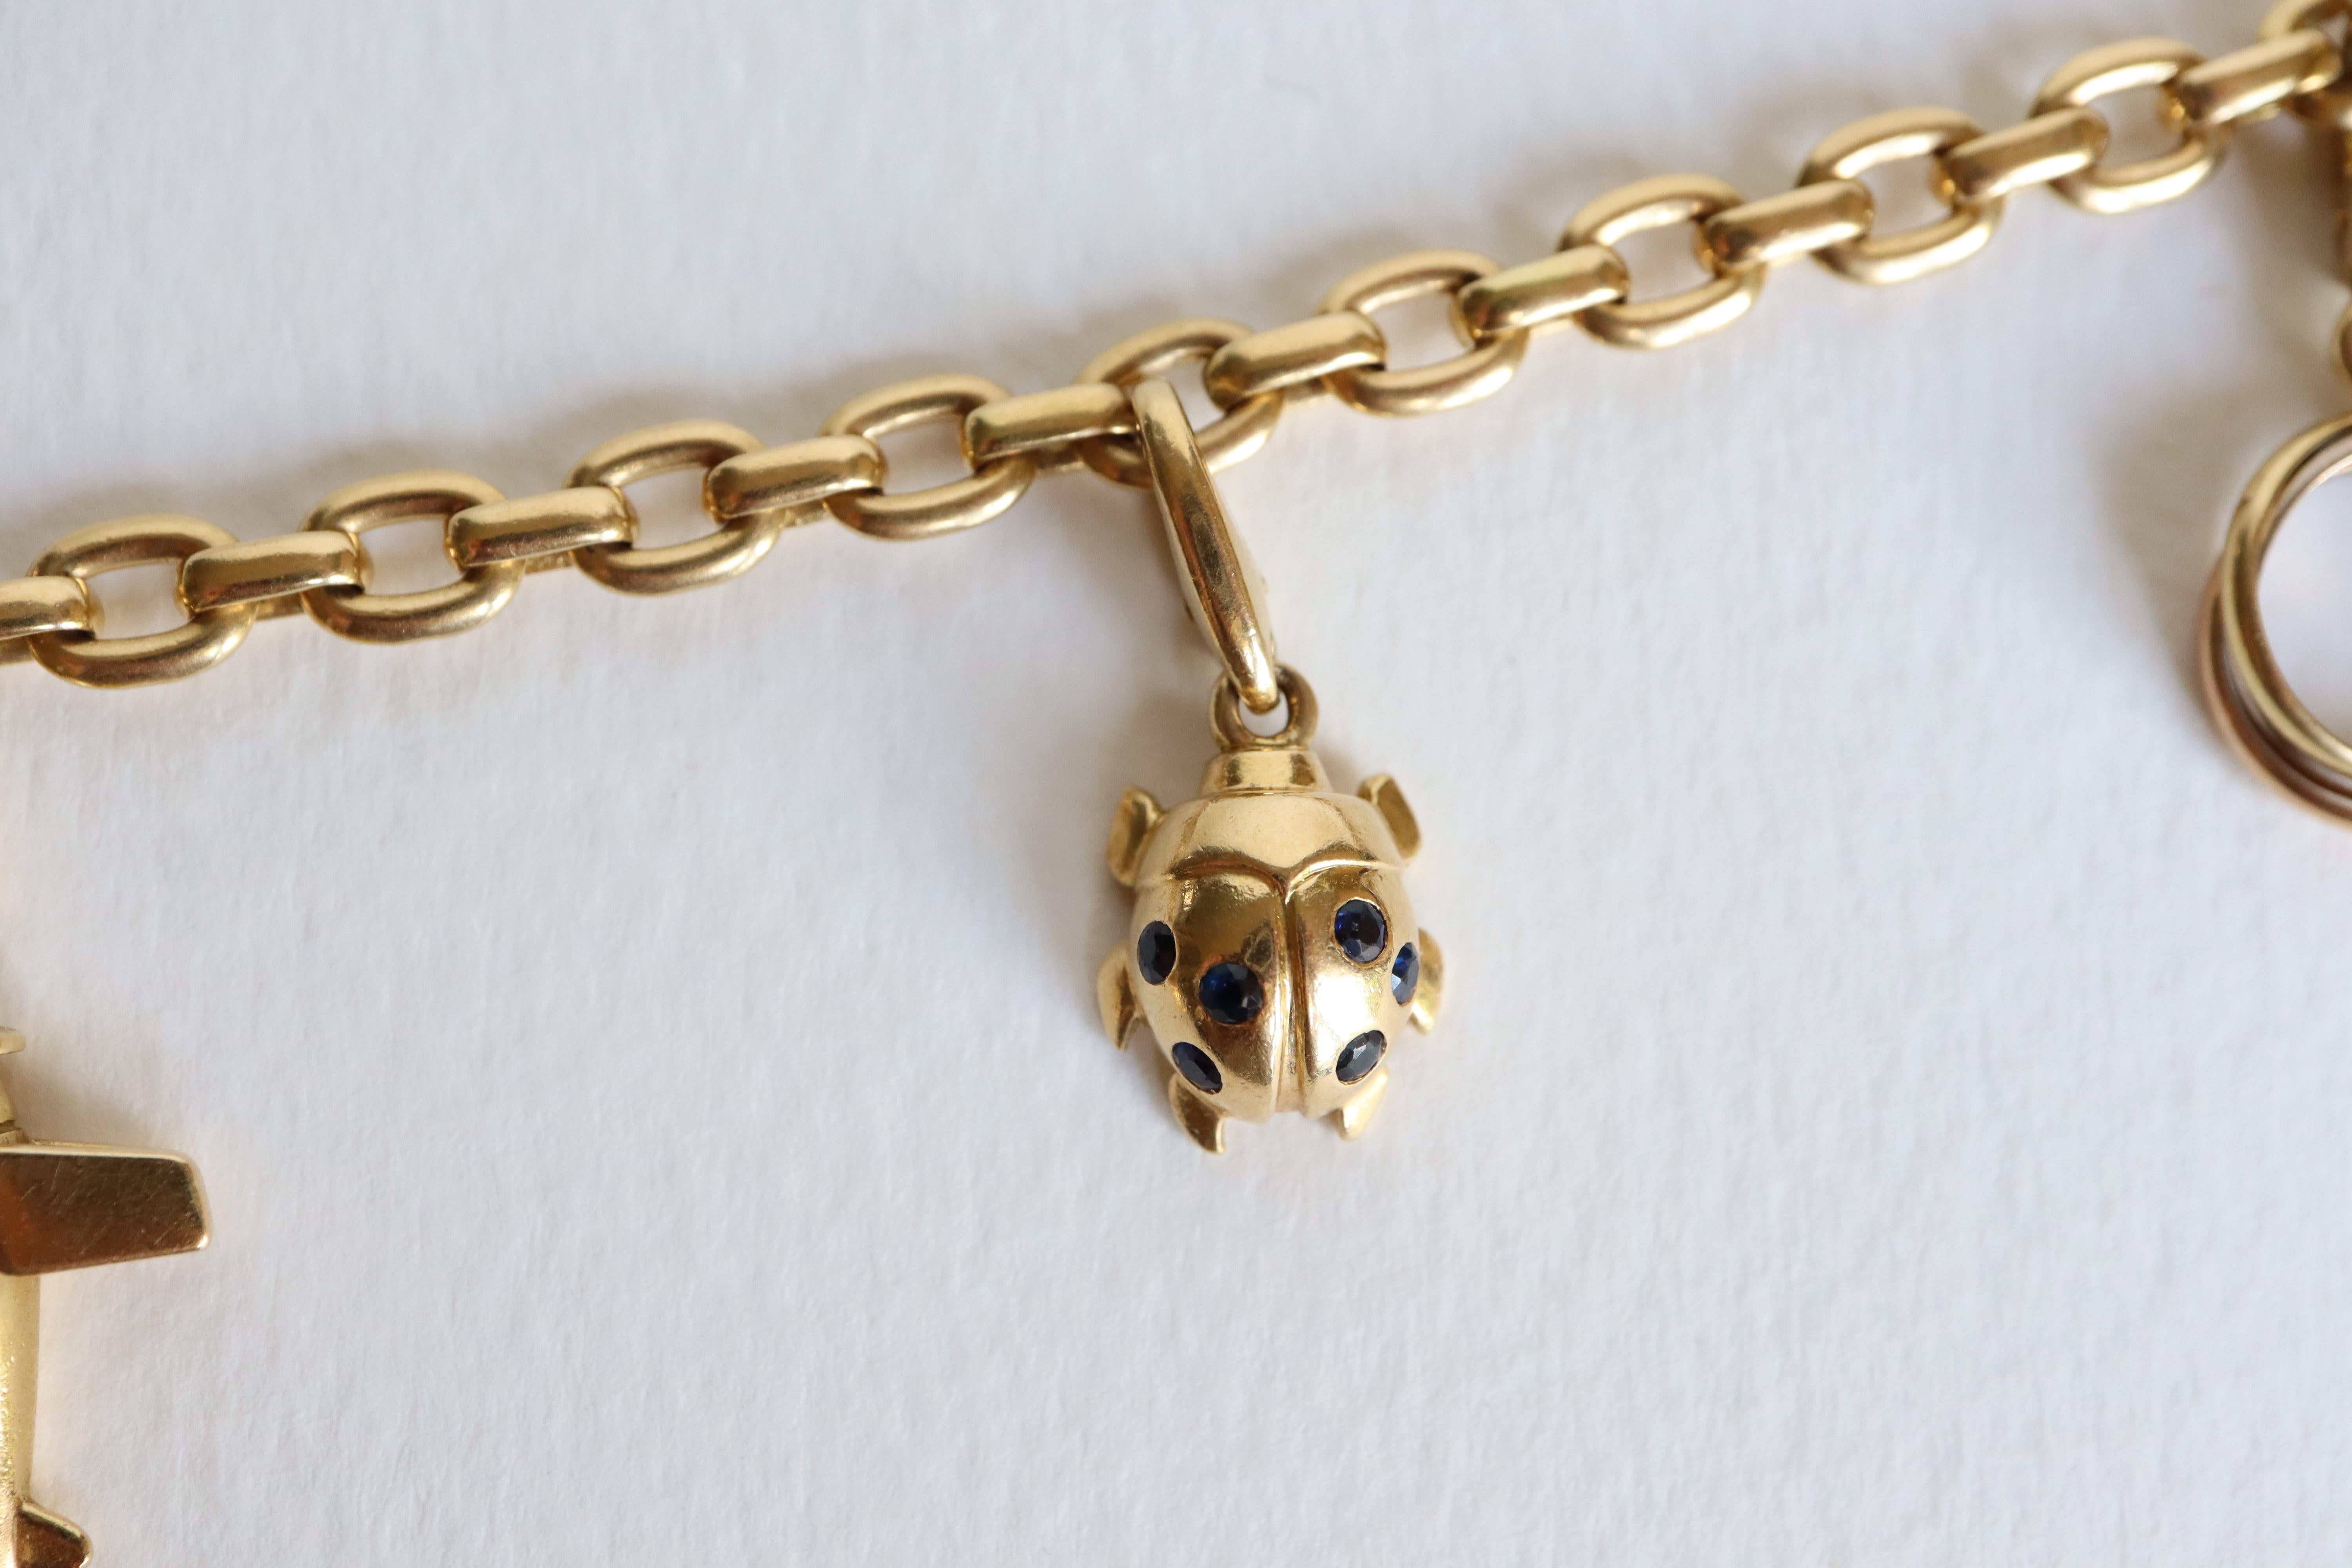 18 carat gold charms